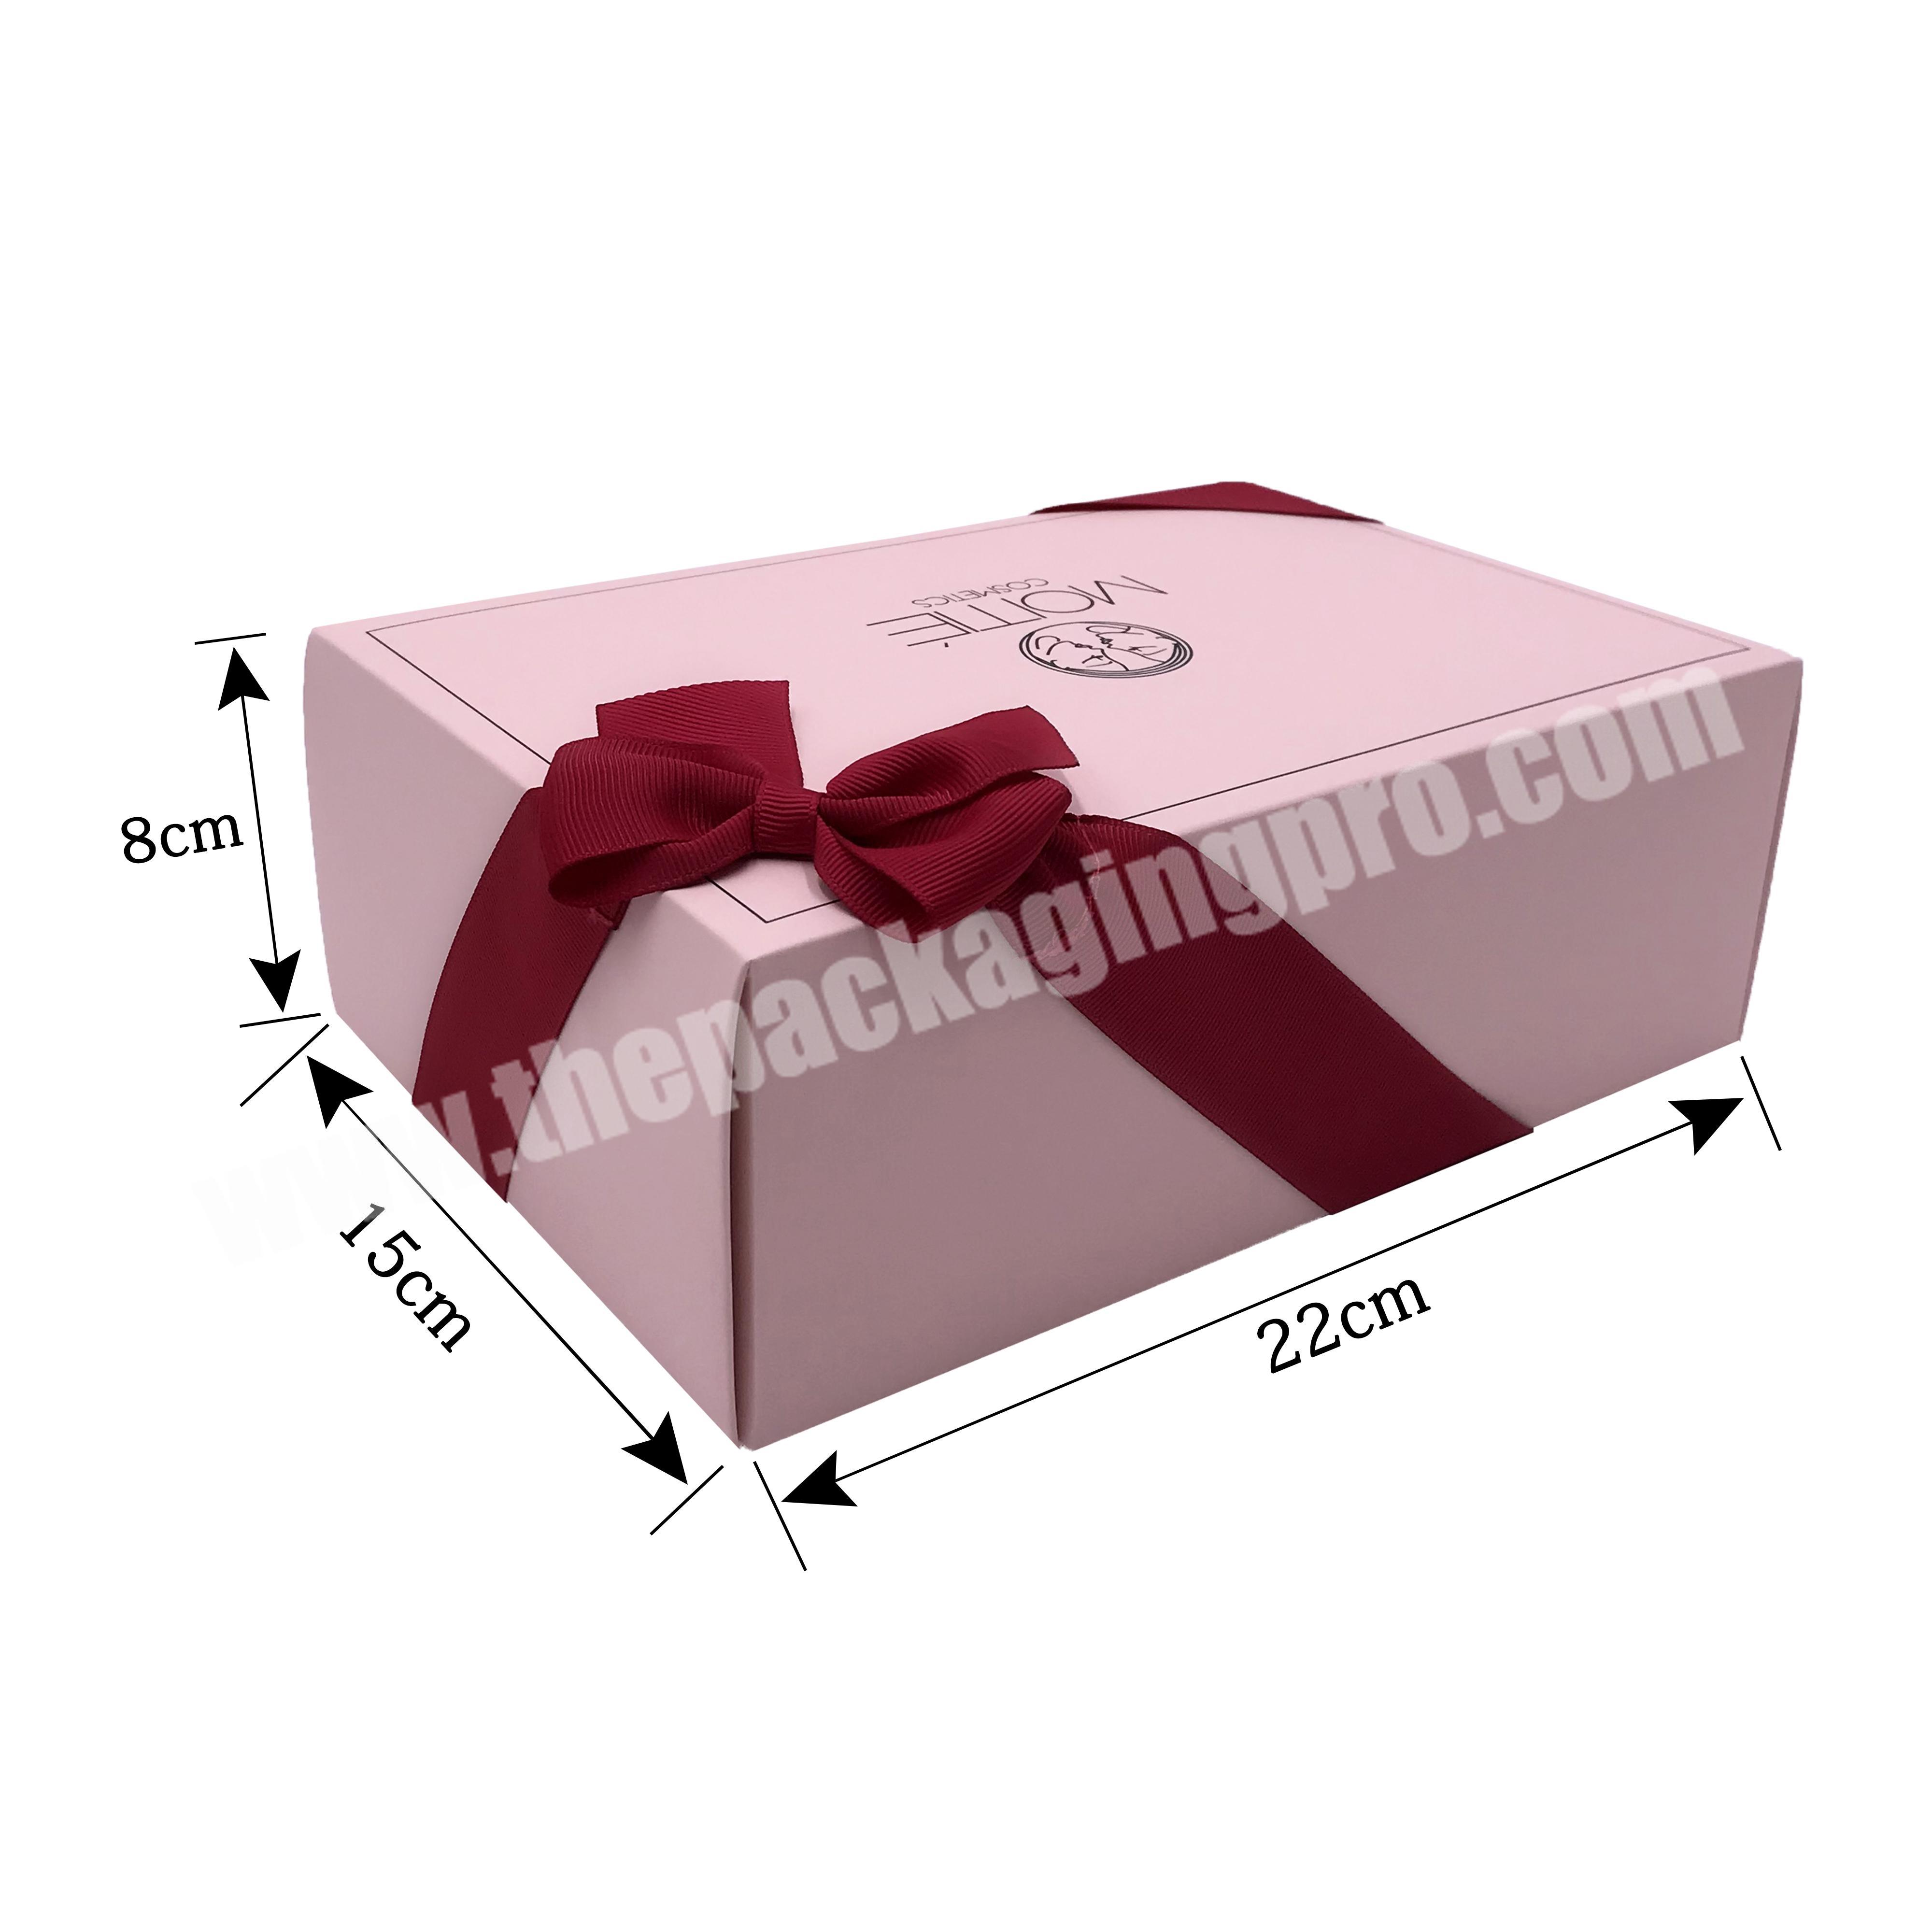 China supplier custom cosmetic portable case luxury box gift sets